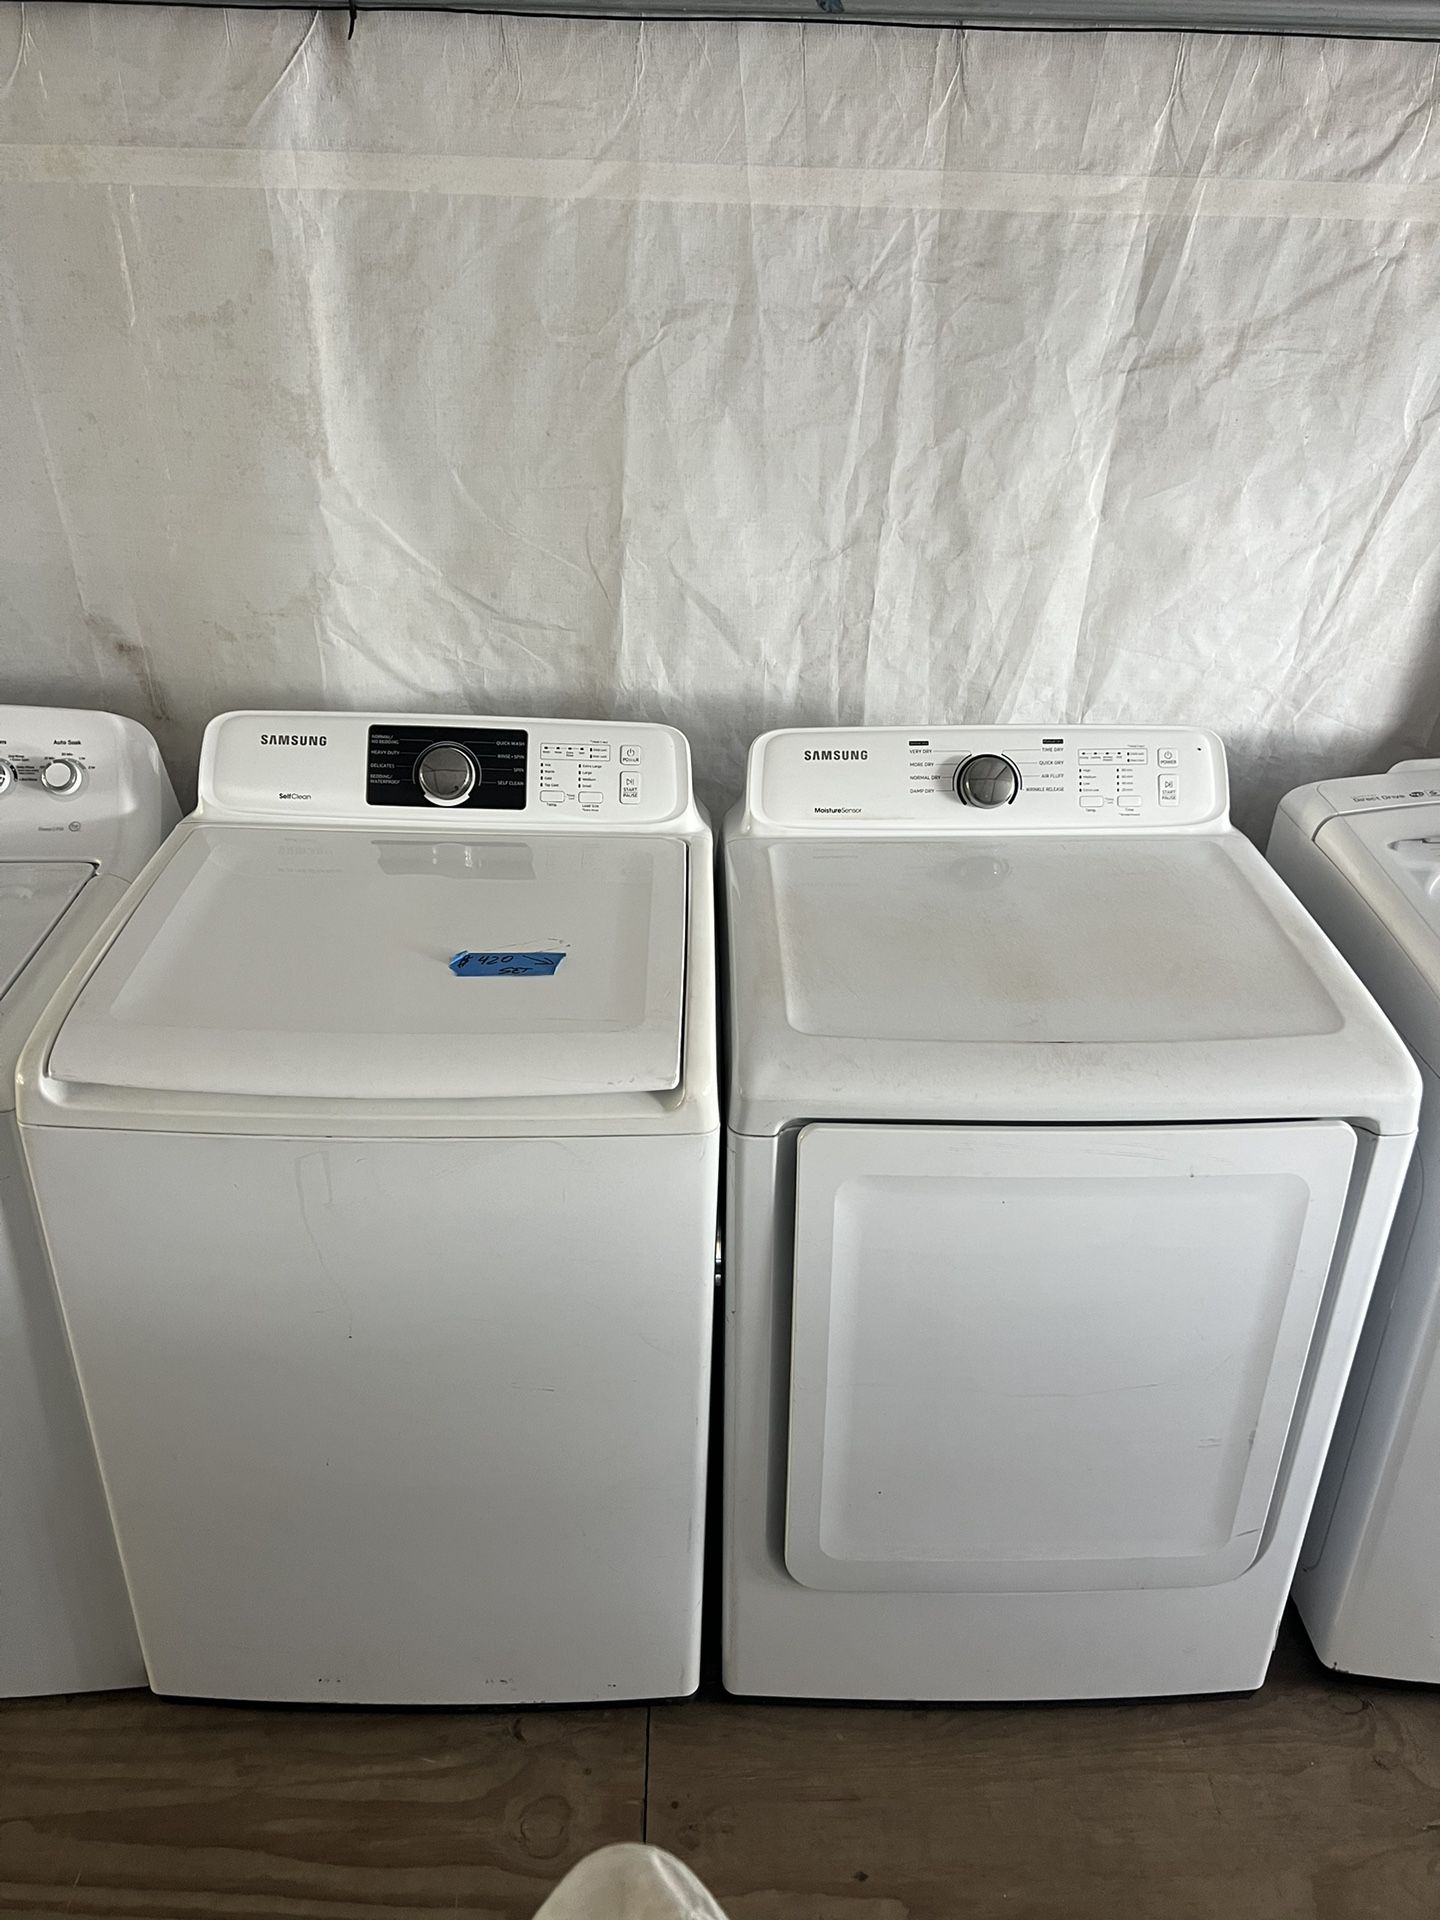 Samsung Washer&dryer Large Capacity Set   60 day warranty/ Located at:📍5415 Carmack Rd Tampa Fl 33610📍 